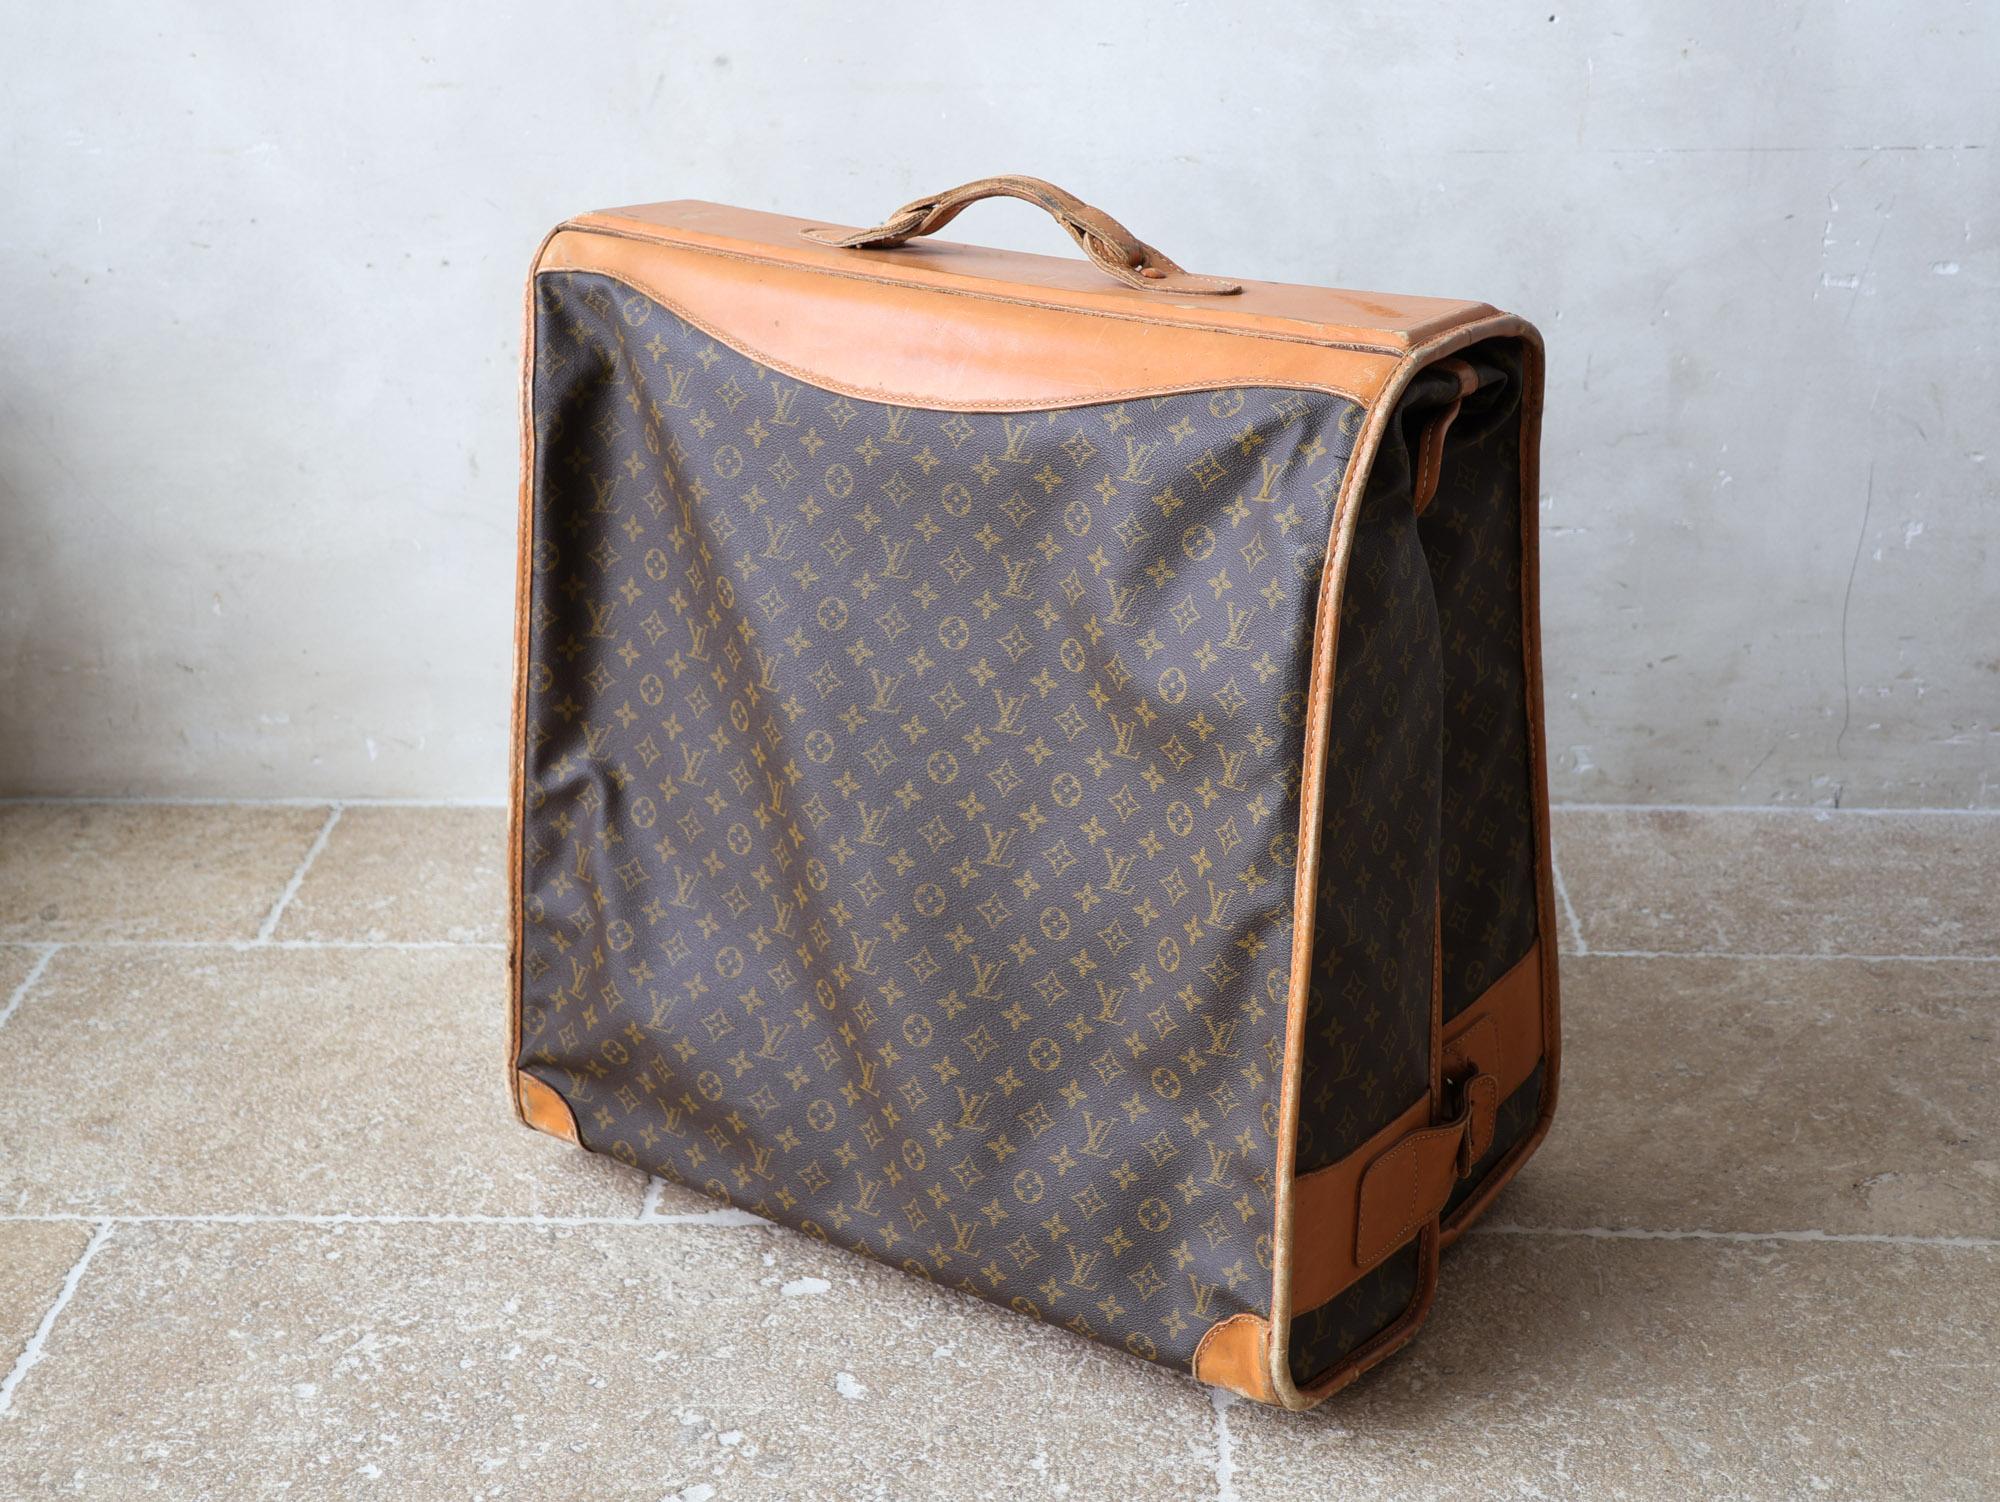 Original vintage Louis Vuitton folding suitcase, from the 1970s. With the initials VP. This large foldable travel bag is made of leather and canvas and can be opened and hung, for example to carry a tailor-made suit, jacket or dress. With its